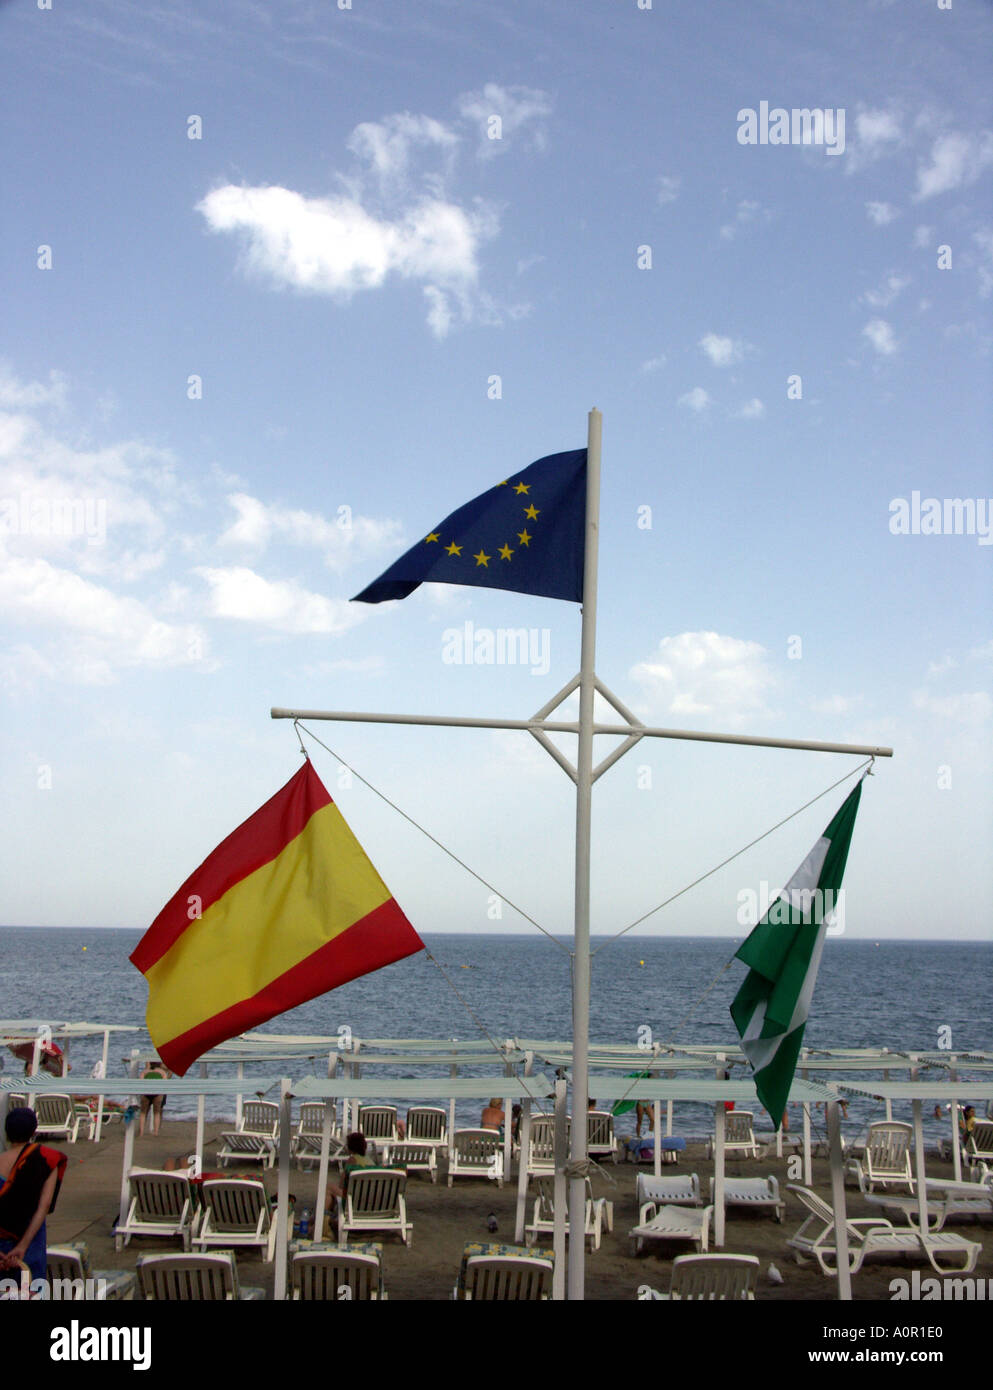 Spanish, Andalucian, and EU  flags flying on the beach, Fuengirola, Costa del Sol, Spain, Europe, Stock Photo